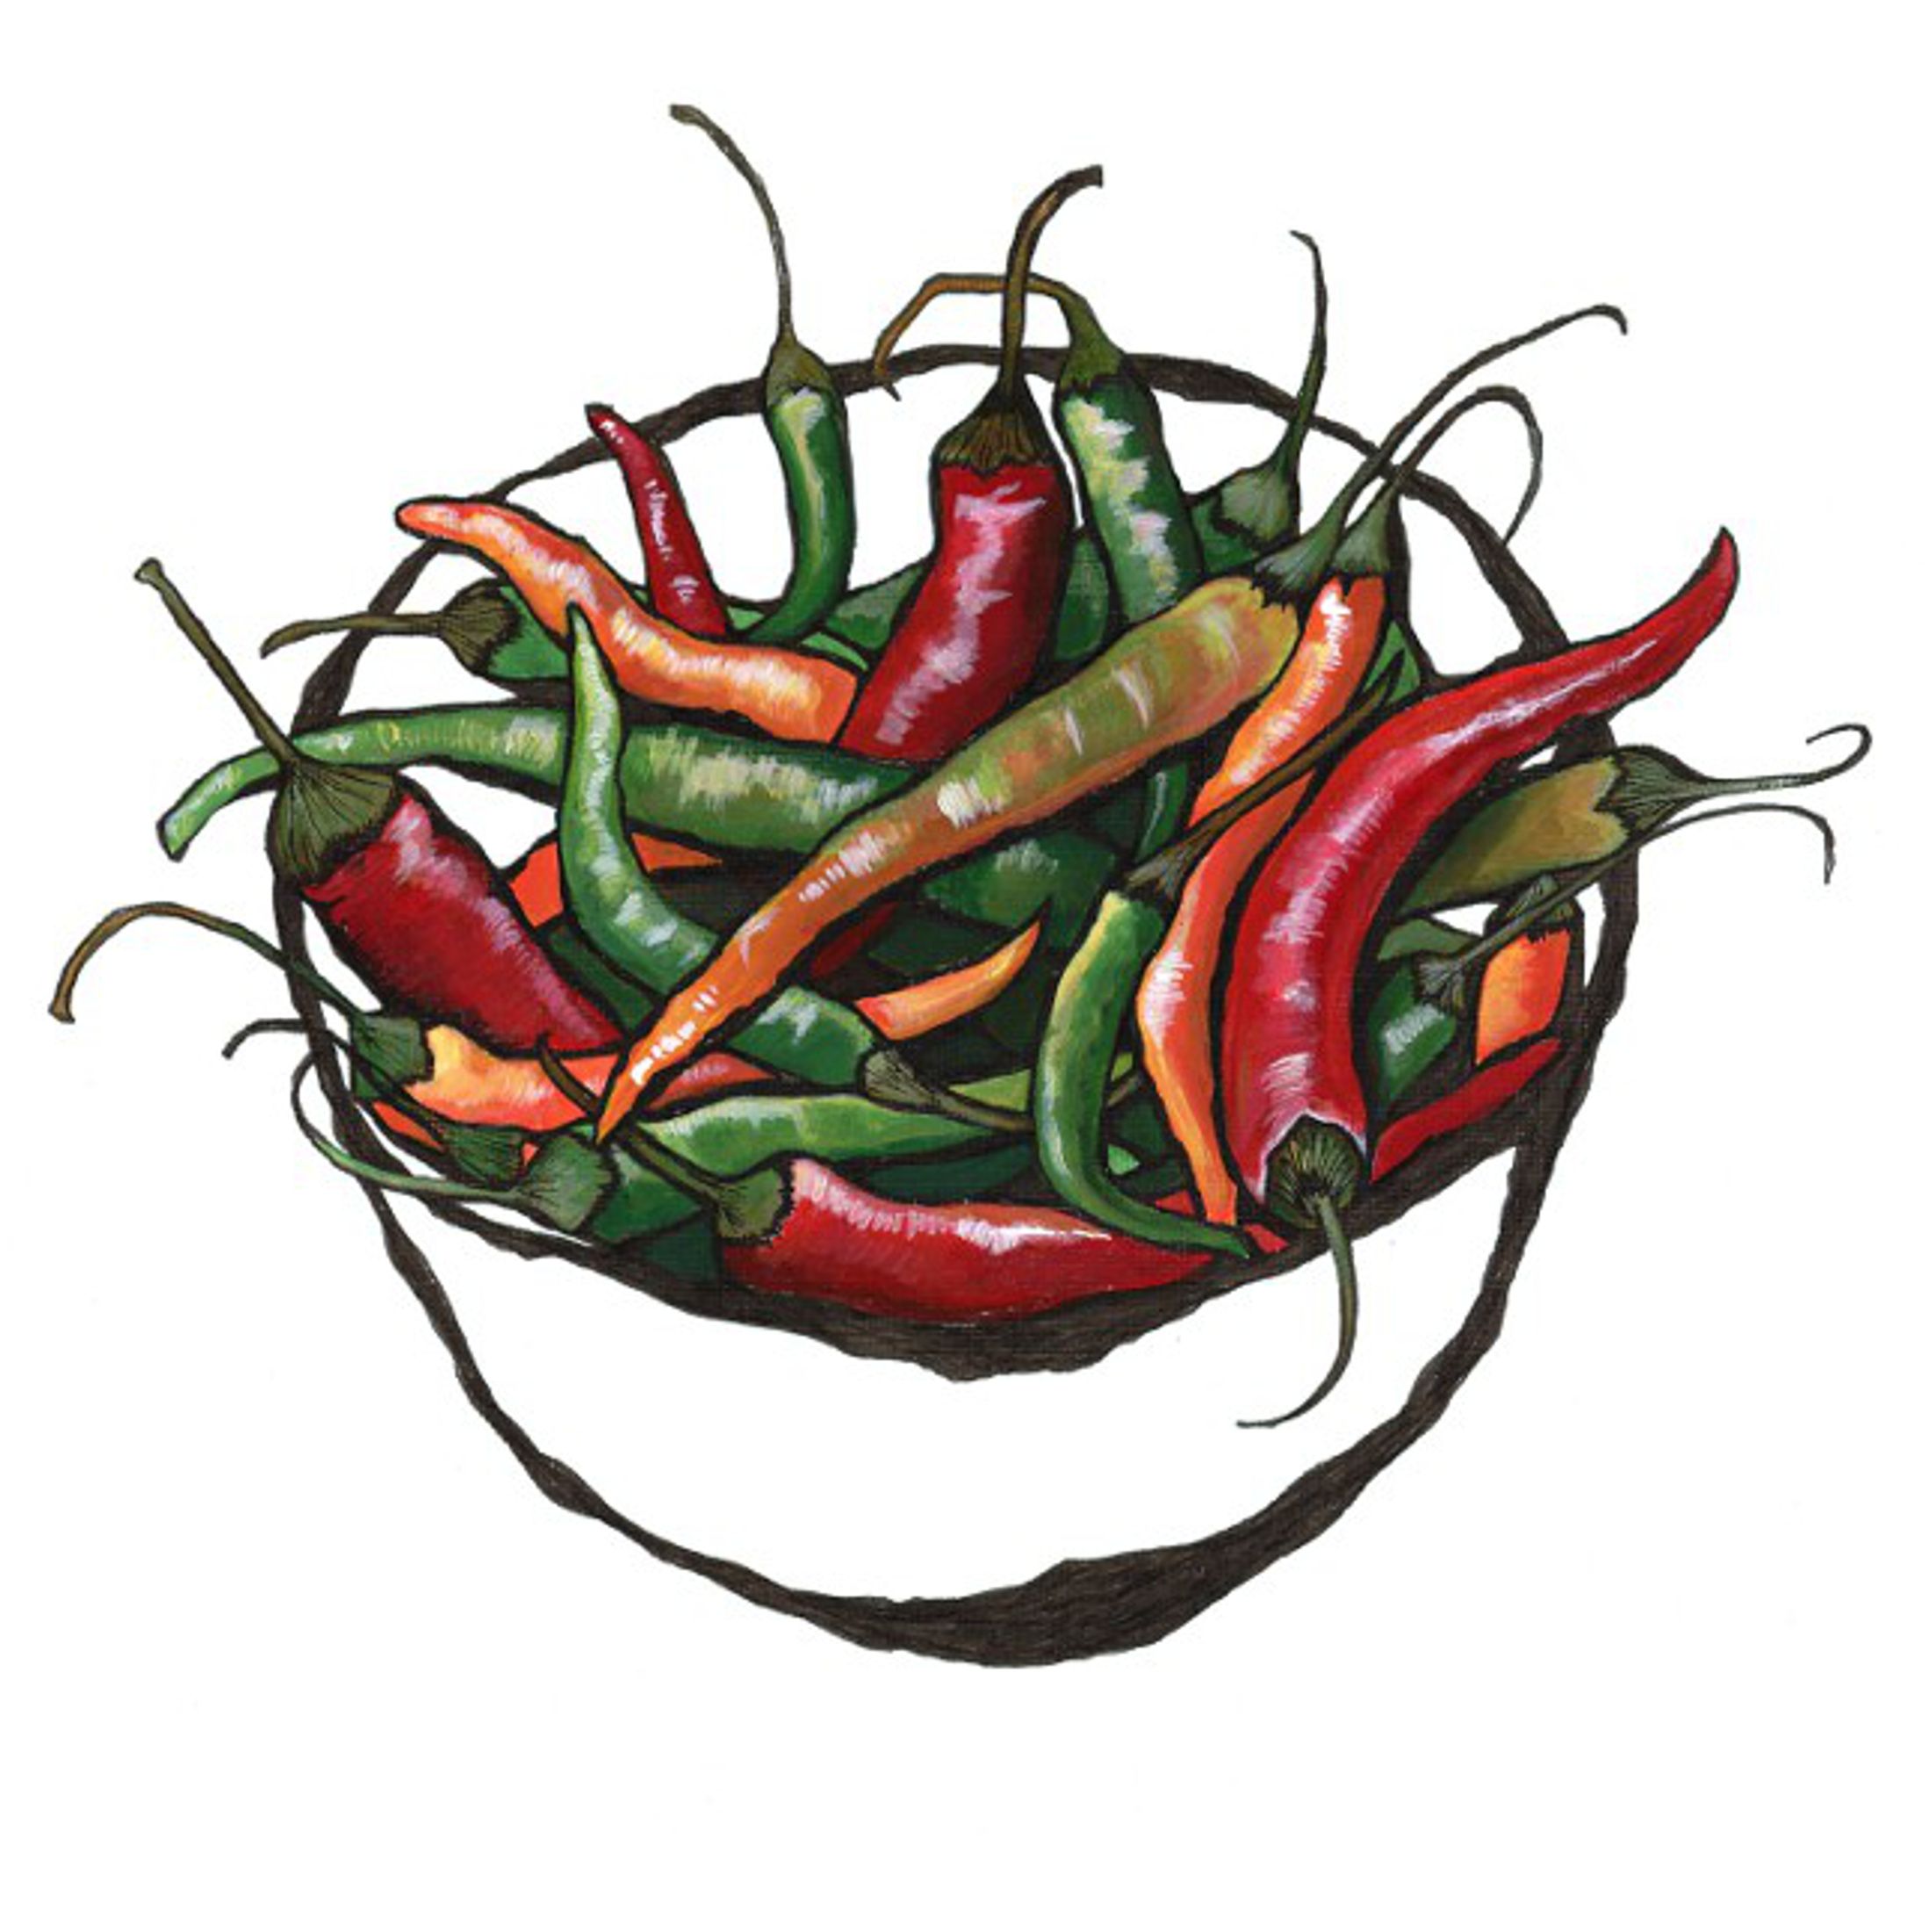 Chillies by Lucy Routh